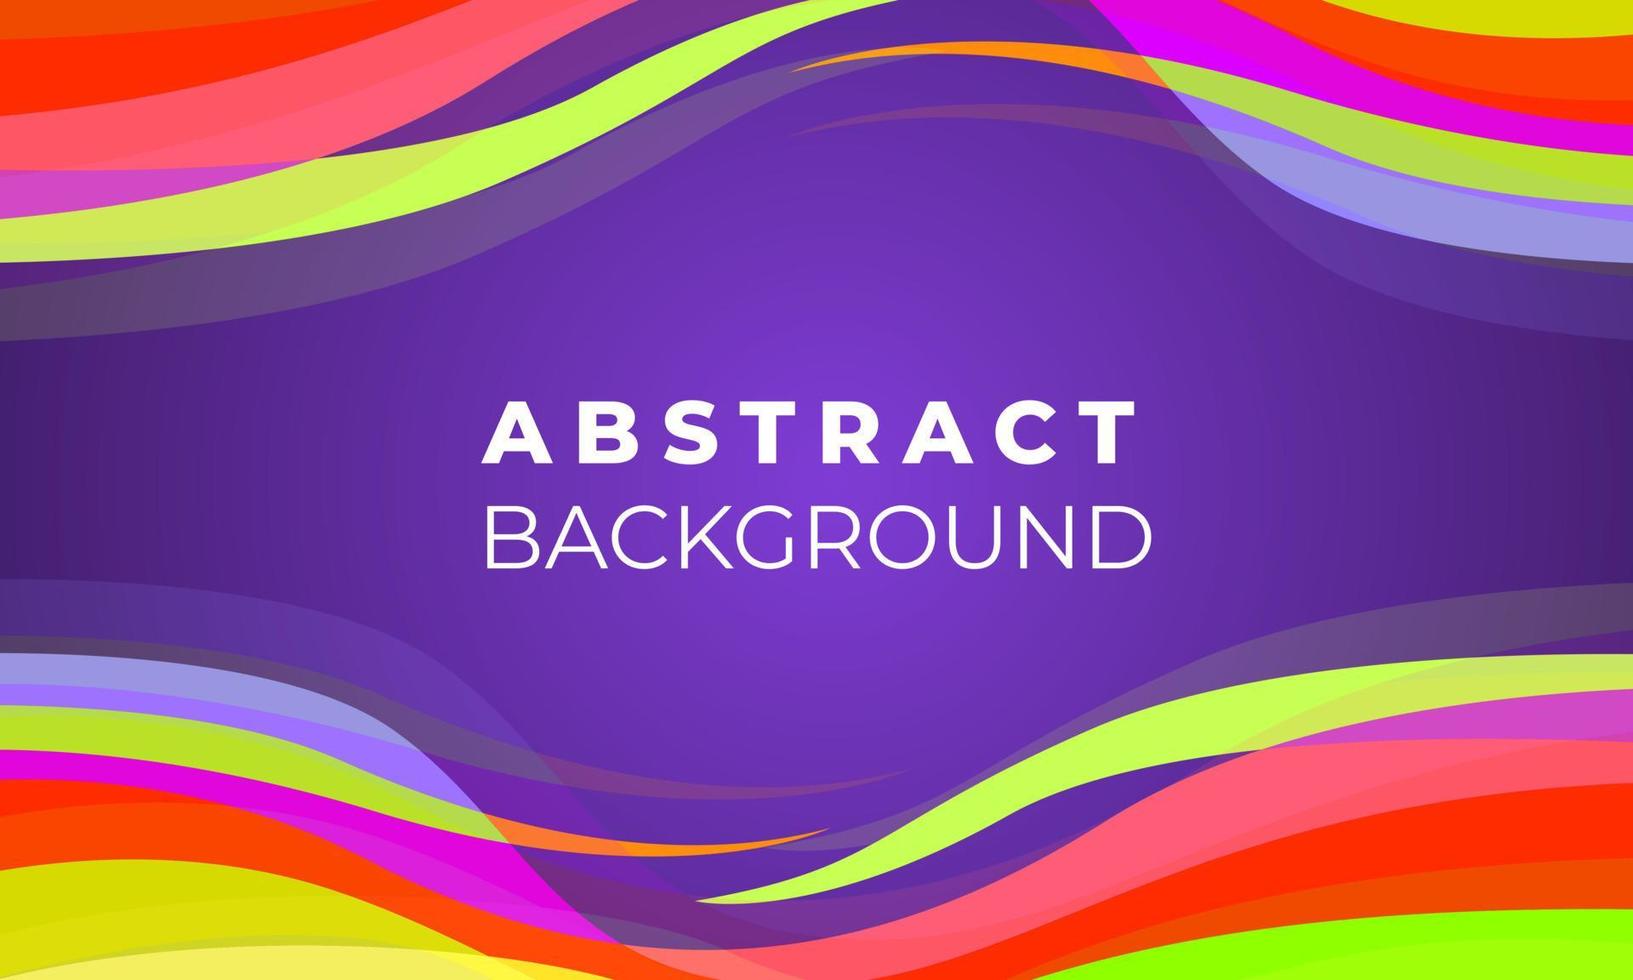 Abstract Background template vector